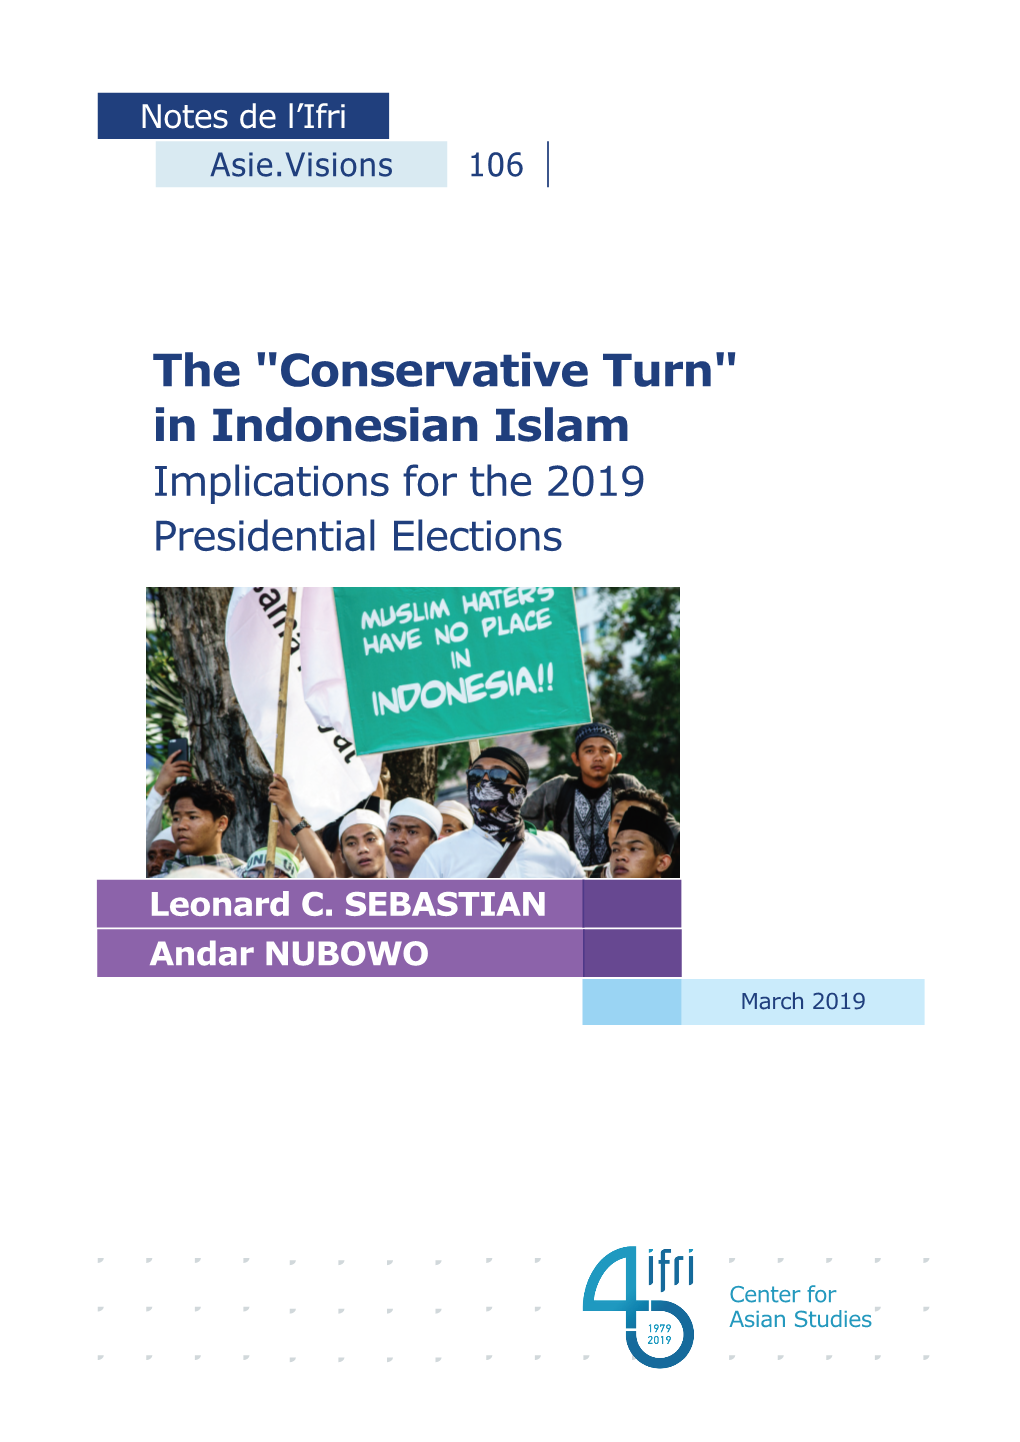 In Indonesian Islam Implications for the 2019 Presidential Elections